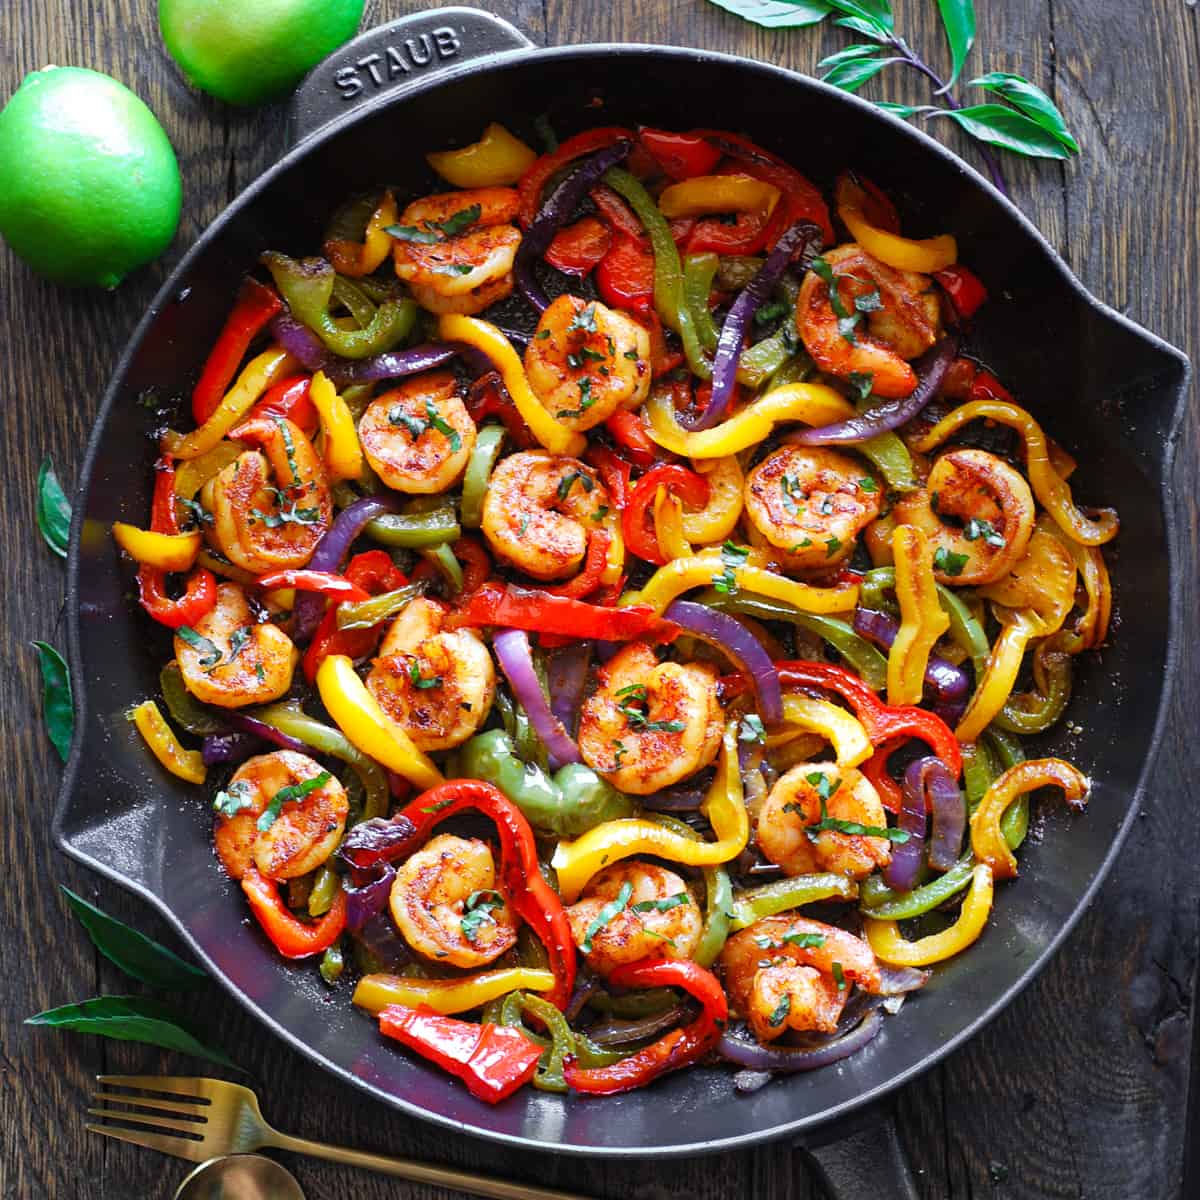 shrimp fajiitas with bell peppers and red onions - in a cast iron skillet.